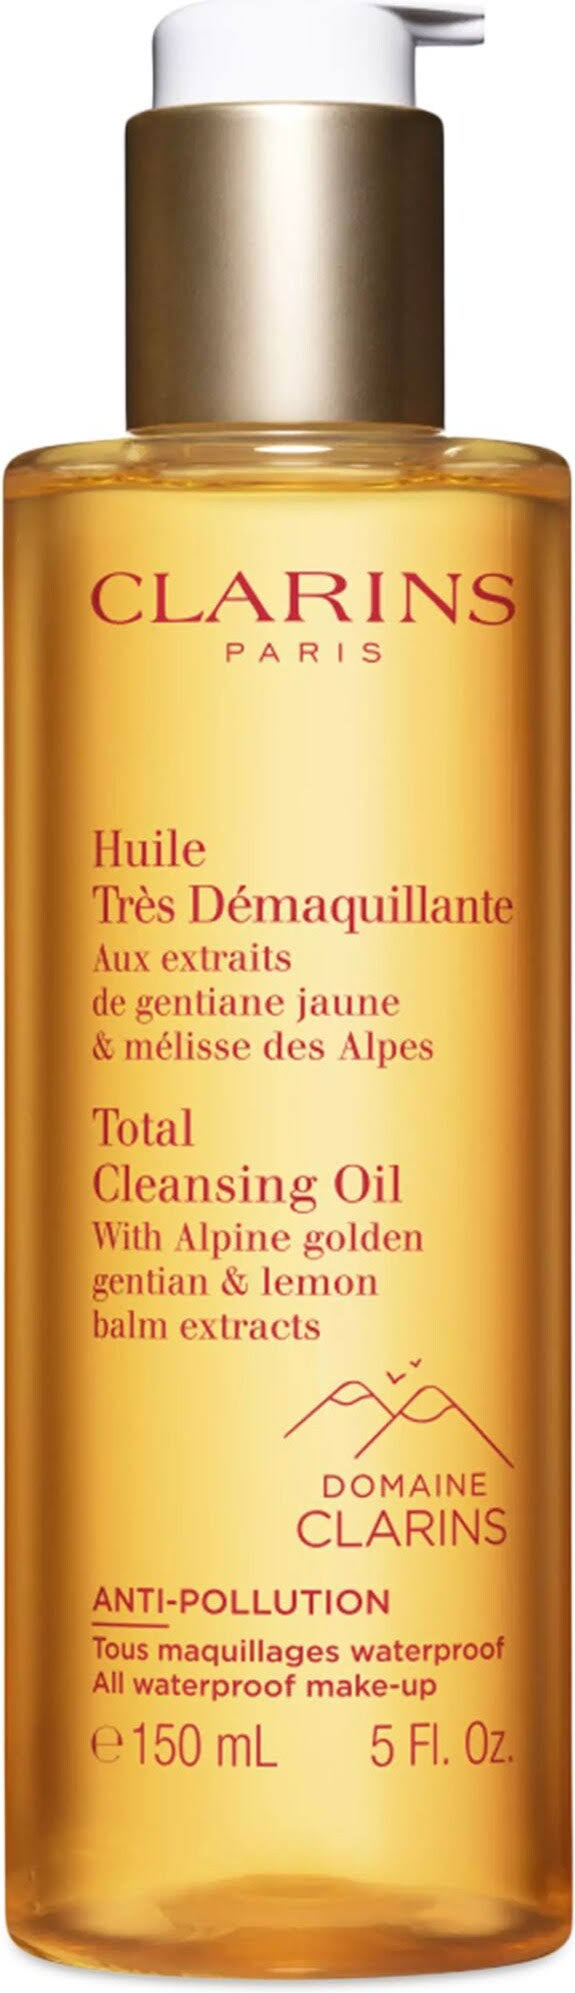 Clarins Total Cleansing Oil - 150ml